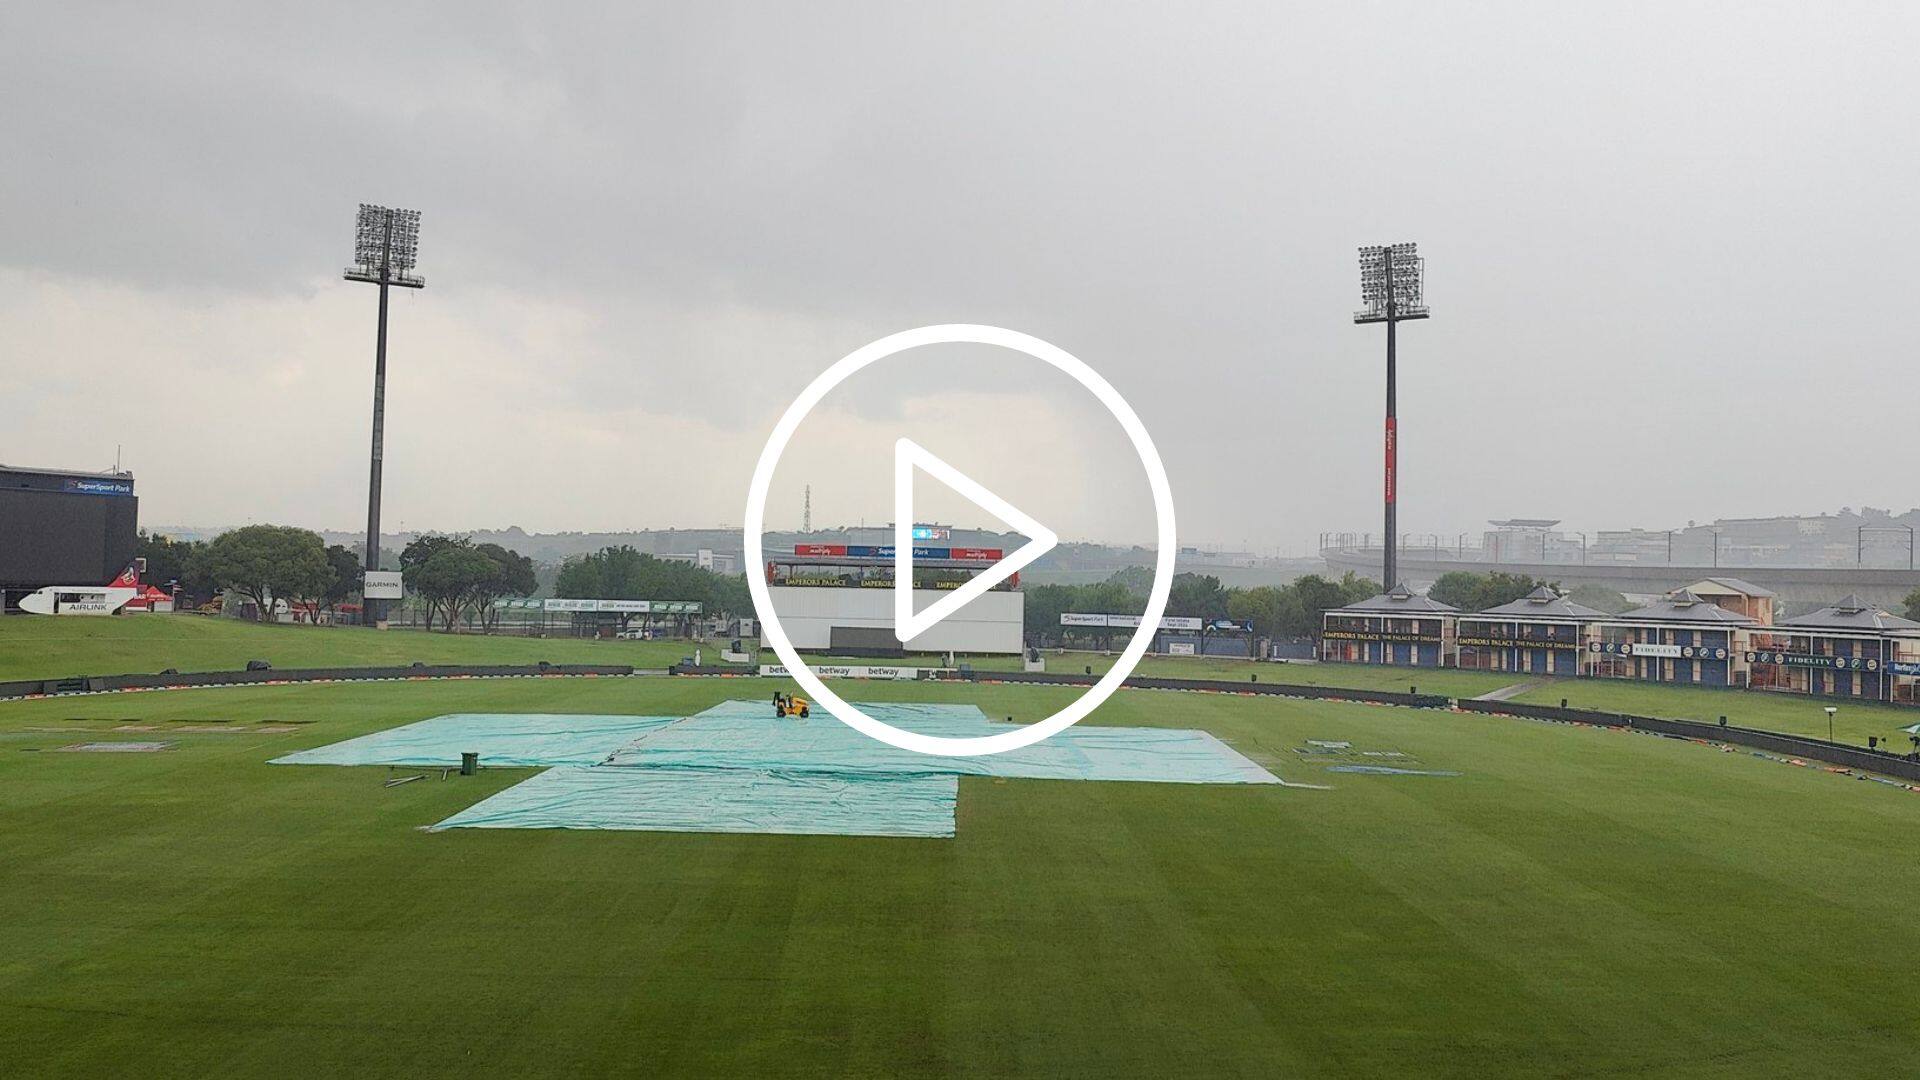 [Watch] Heavy Rain Arrives In SuperSport Park Centurion Ahead Of IND-SA First Test